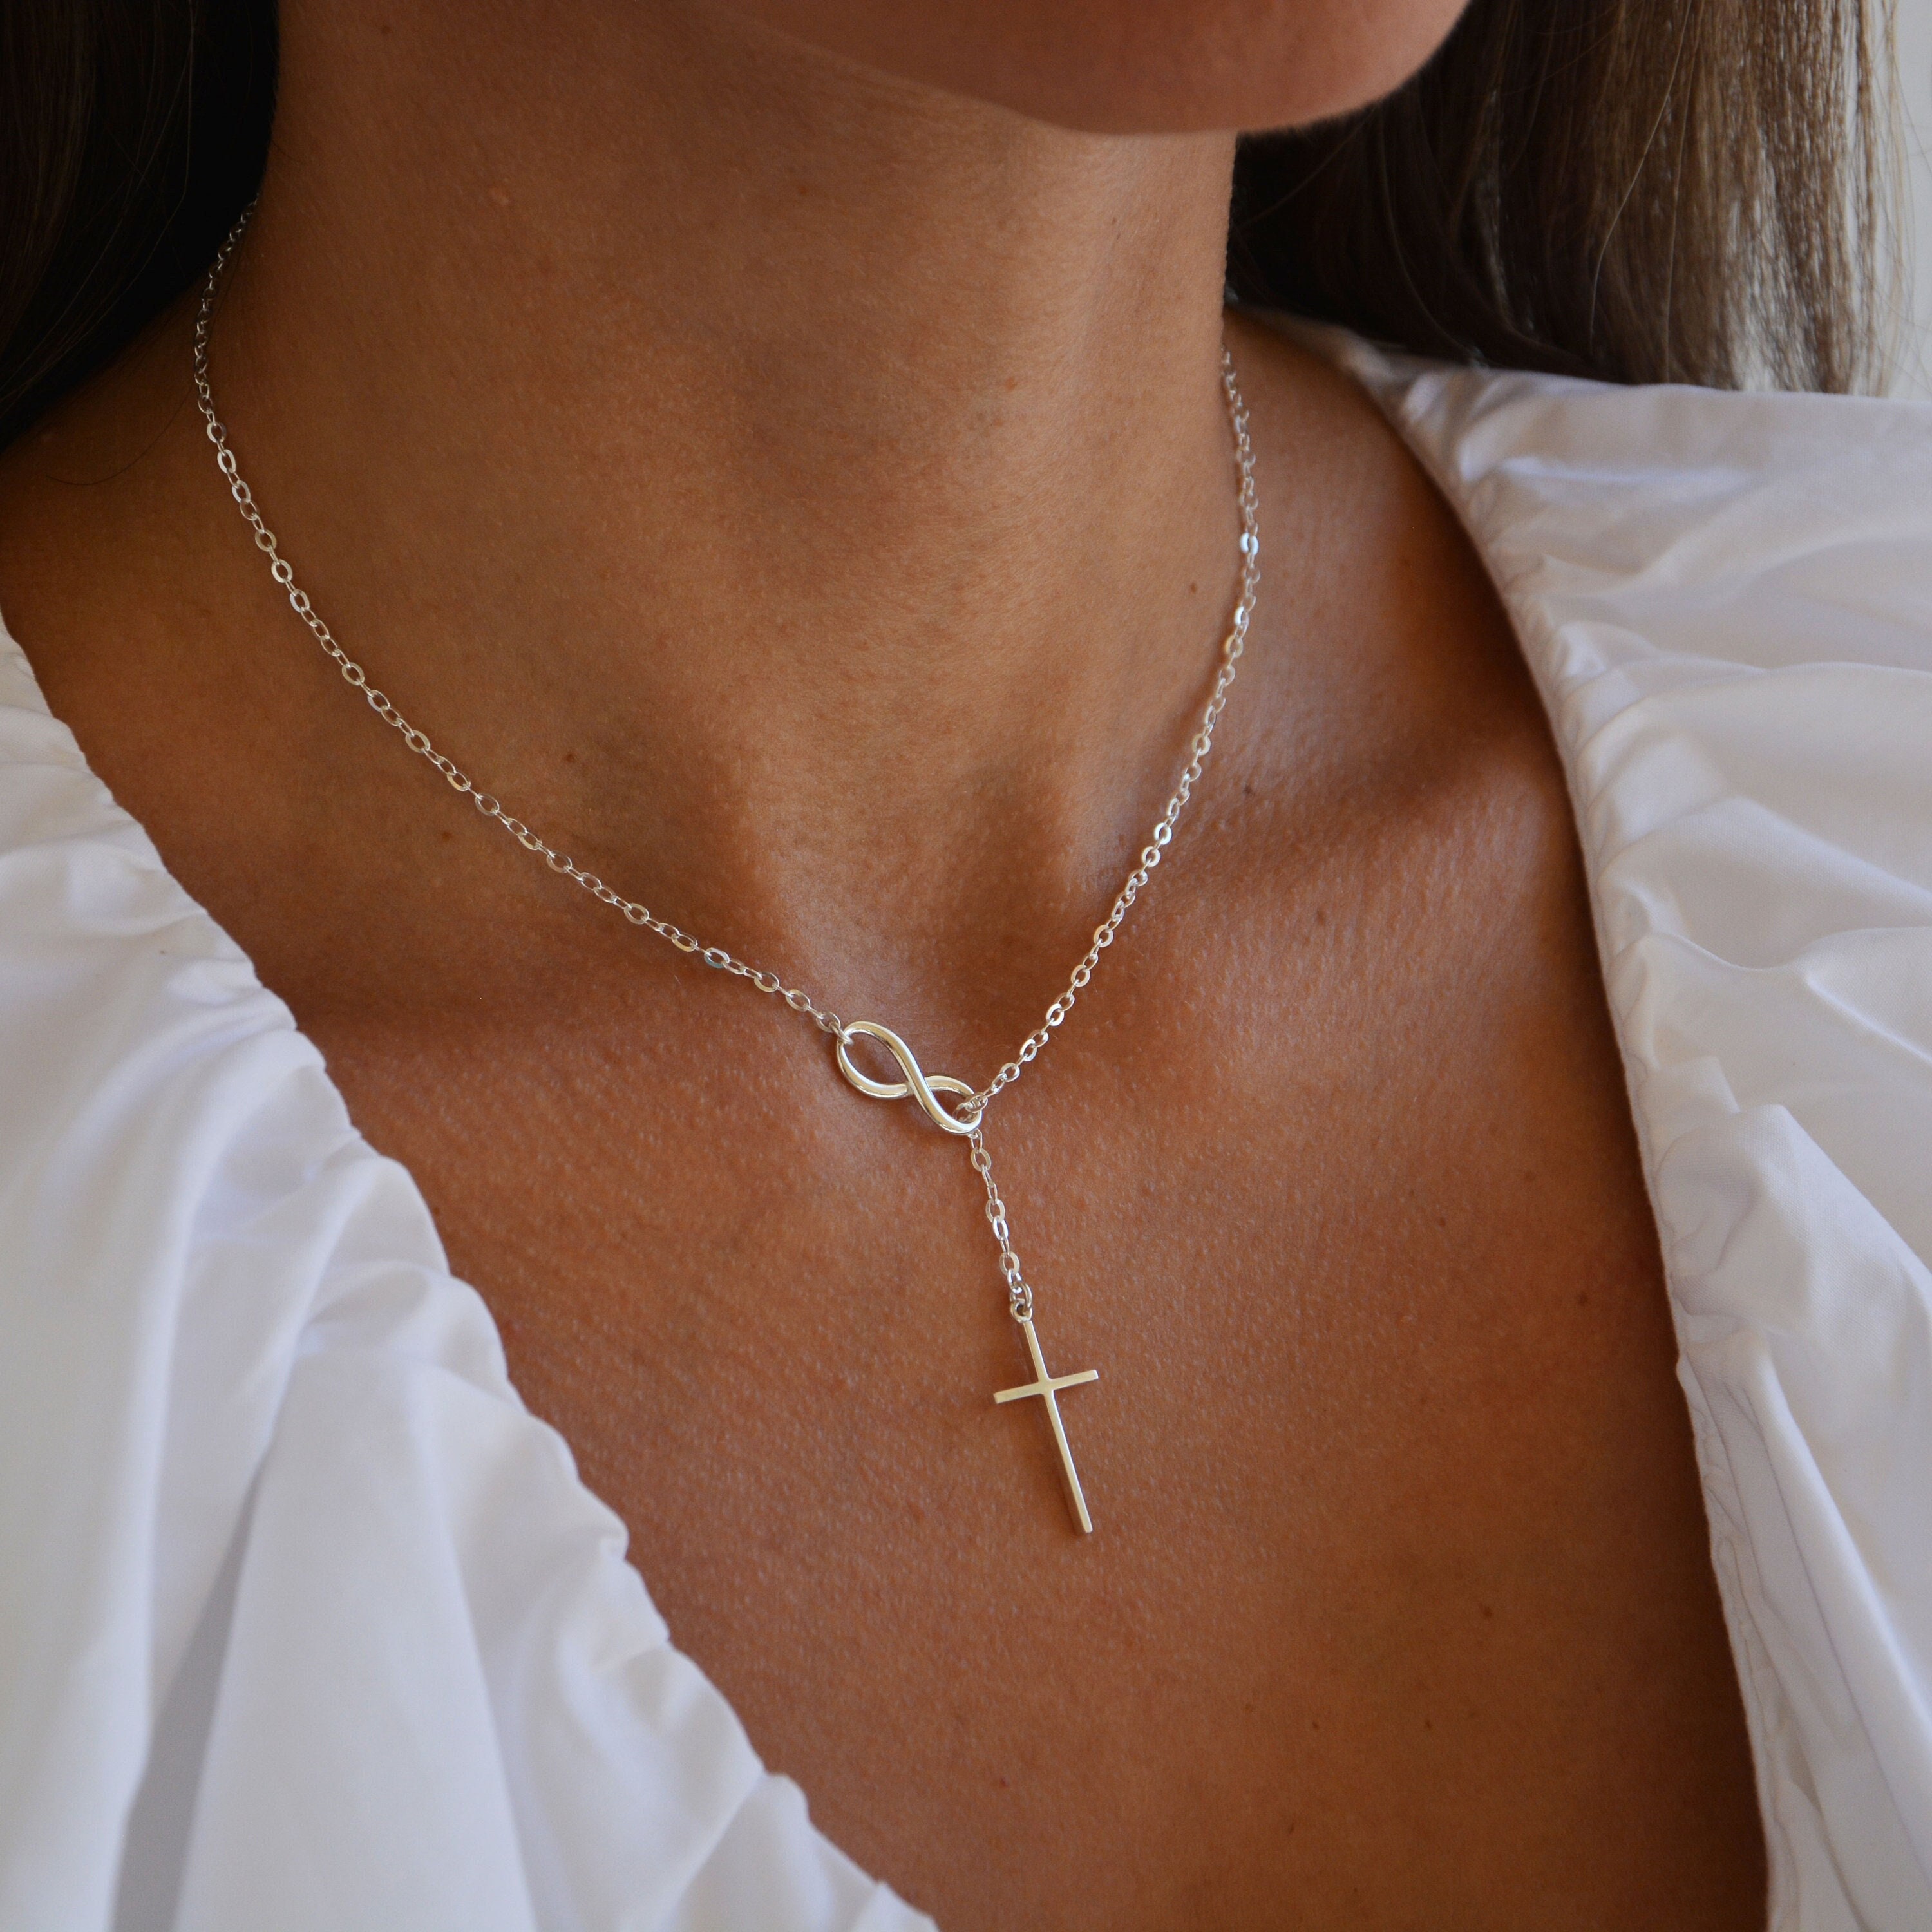 10K Gold Infinity Cross Necklace with Simulated Pearl #2241  --DISCONTINUED--NO LONGER AVAILABLE